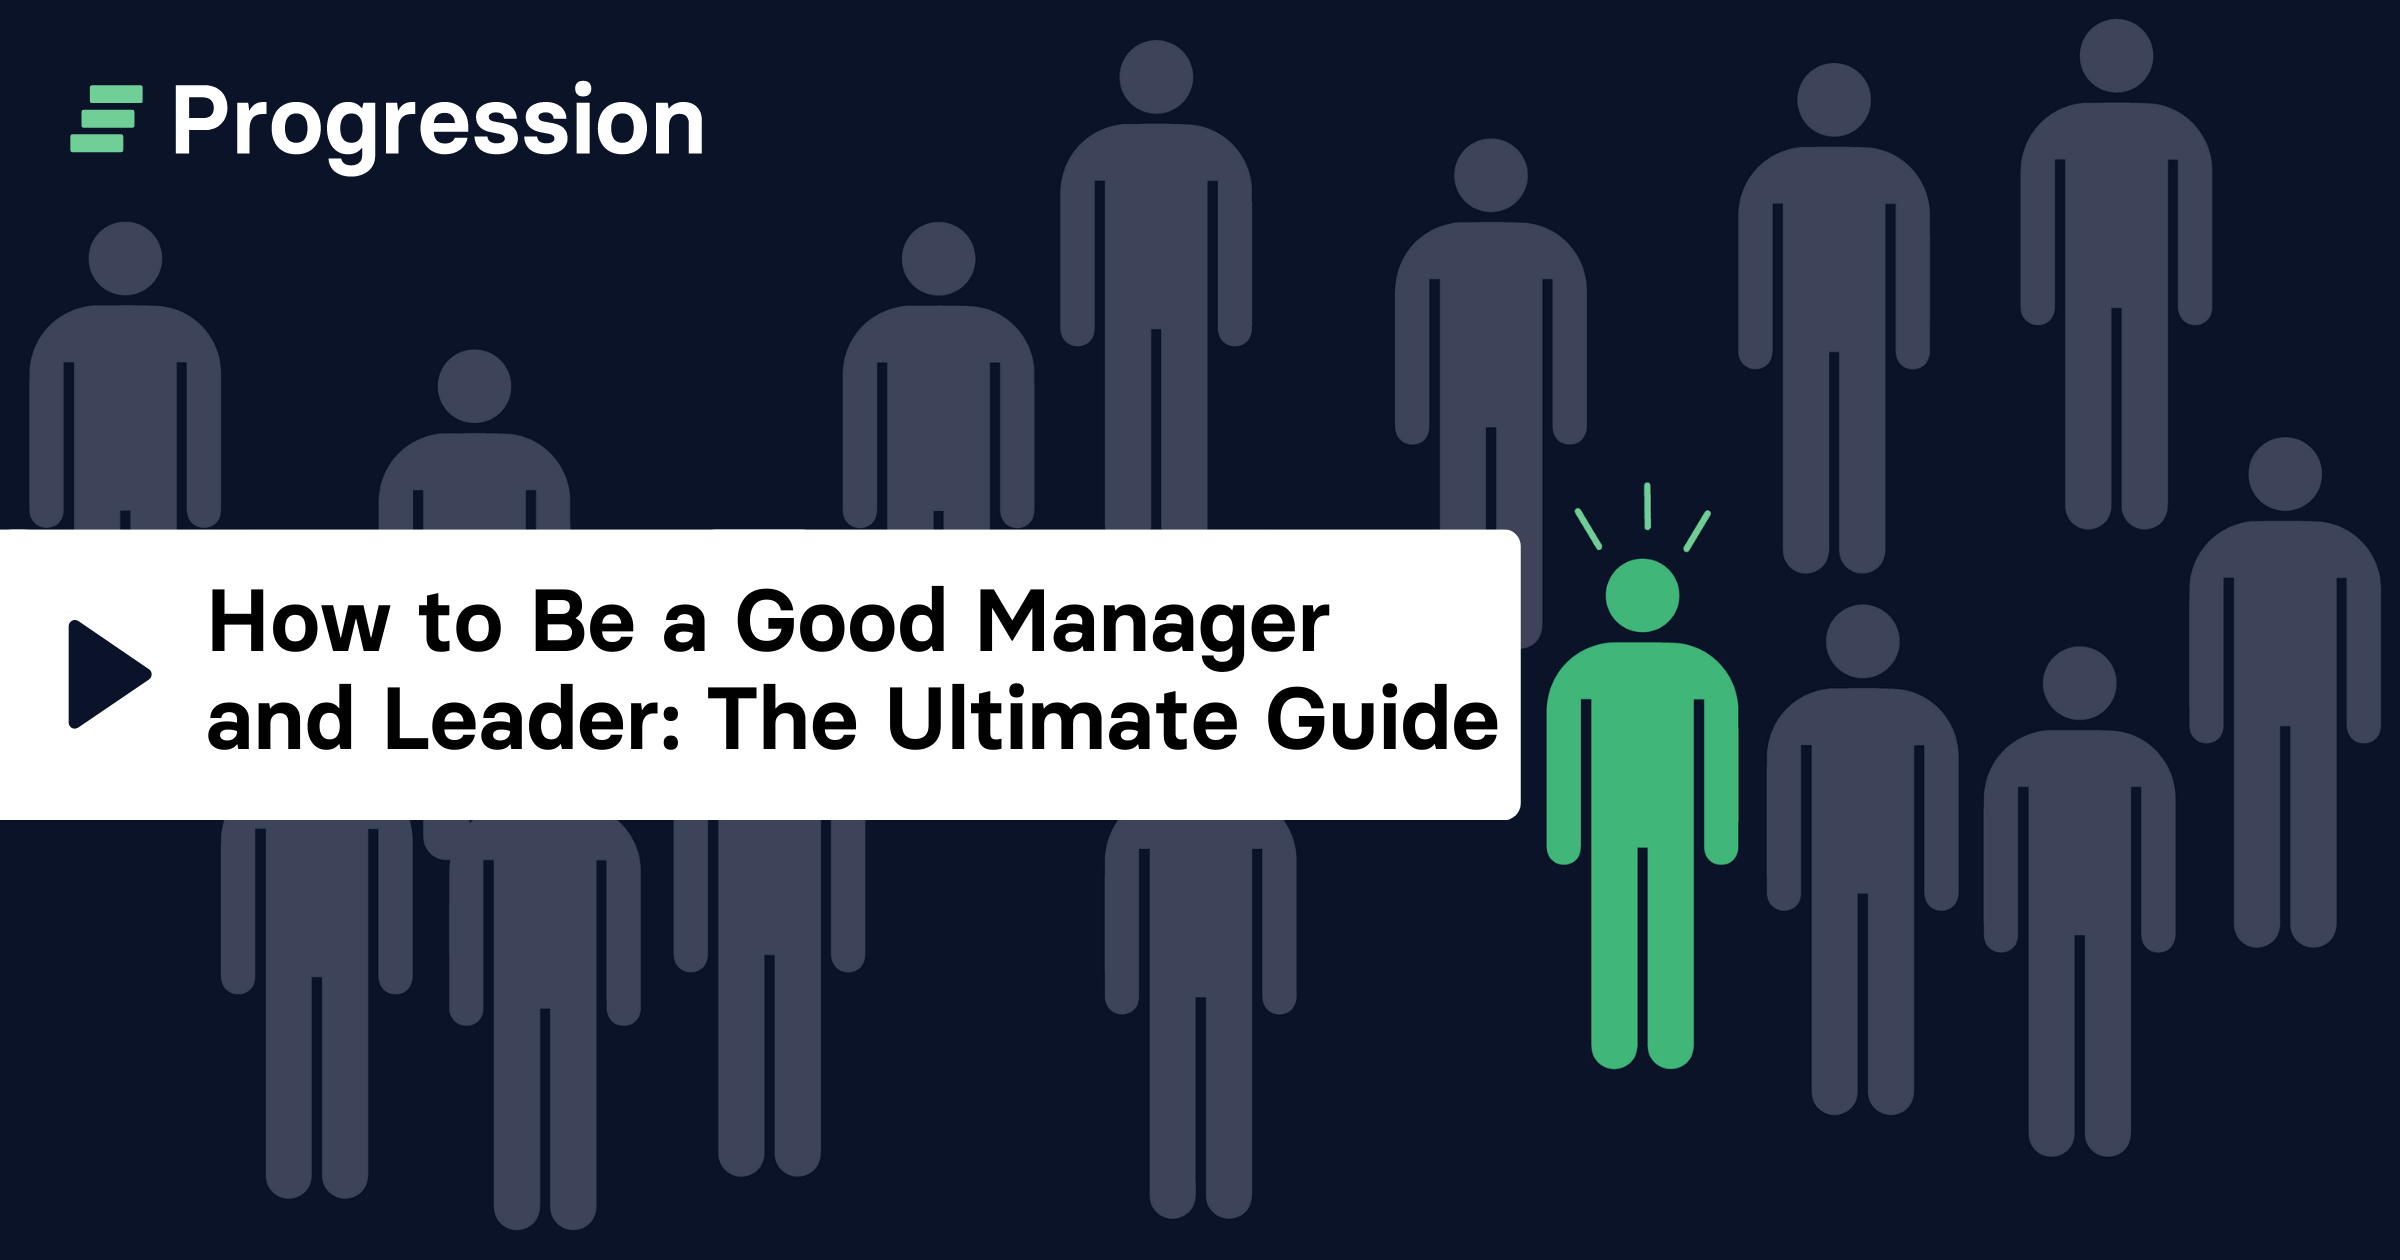 How to be a good manager and leader: The ultimate guide